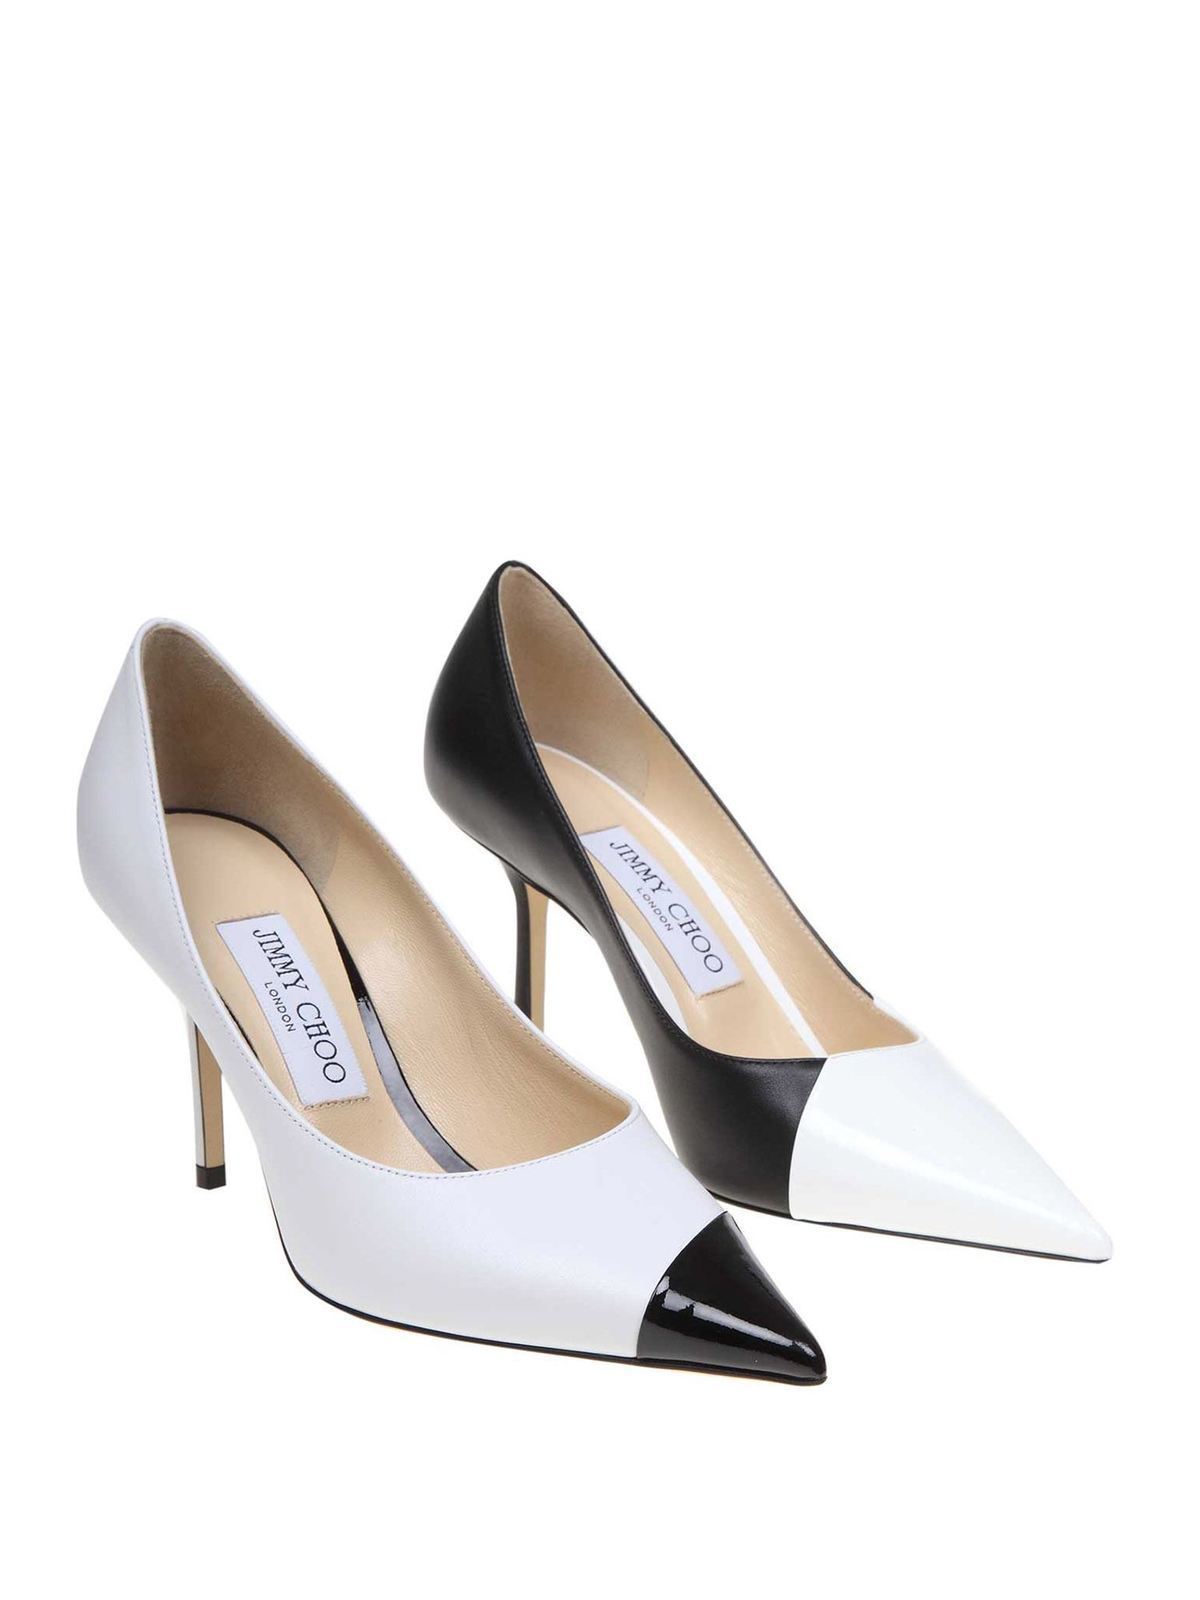 Jimmy Choo - Love 85 pumps in white and 